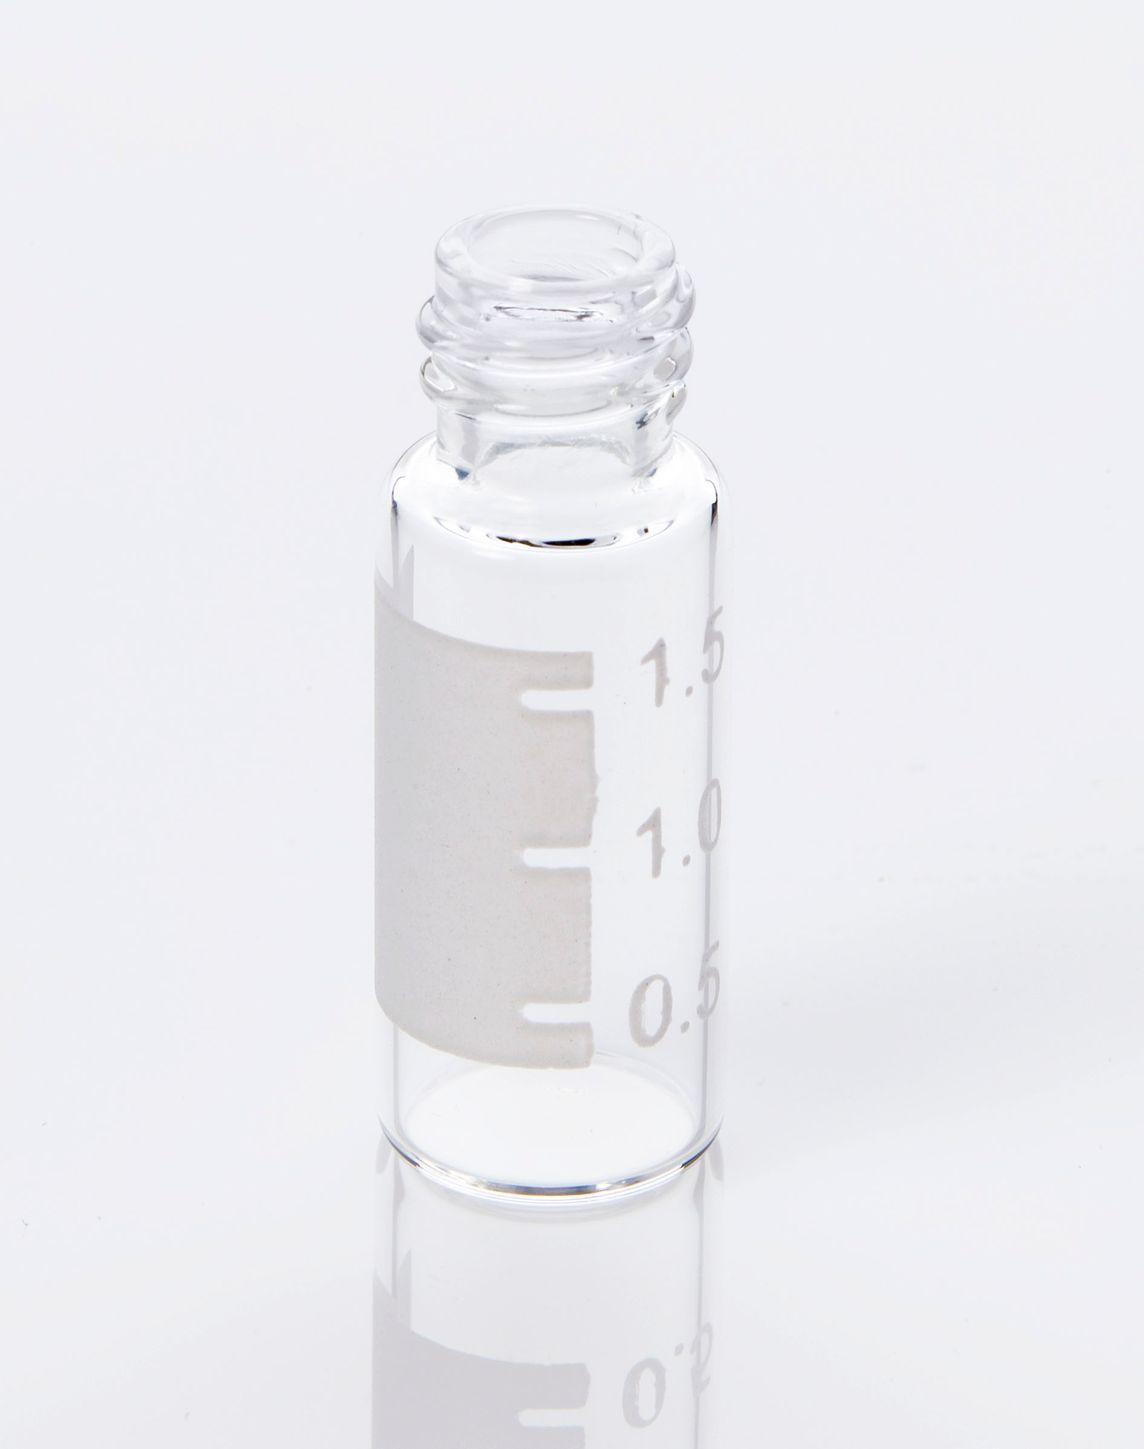 Vial 2mL Clear Glass (12x32mm) with Graduated Marking Spot Standard Mouth 8-425 Screw, 100/pk